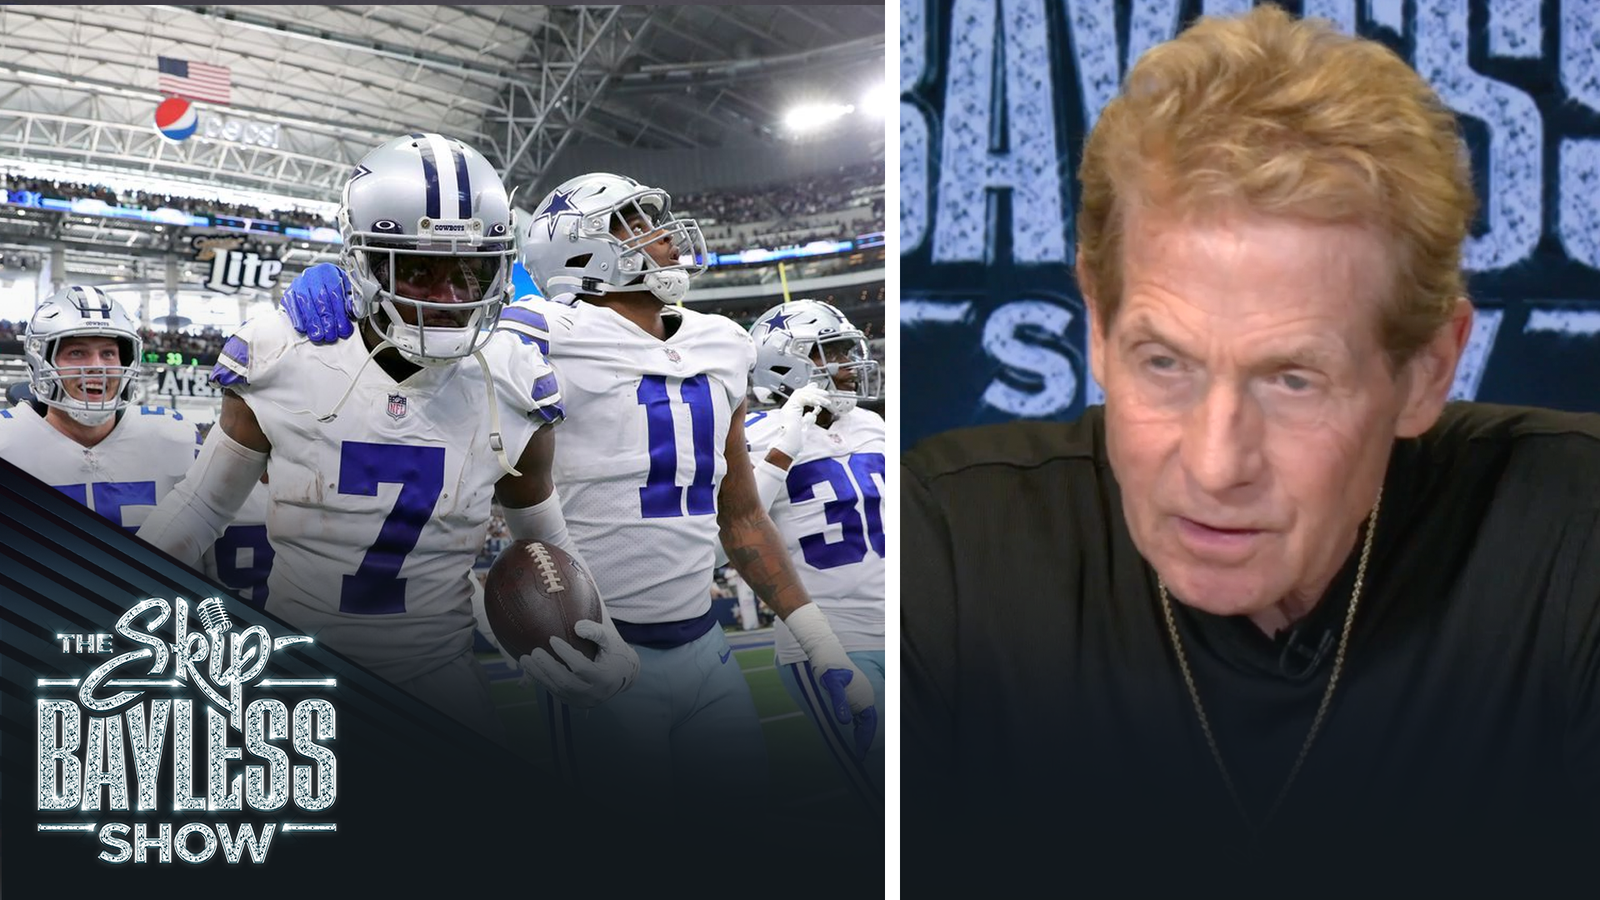 This year's Dallas Cowboys defense will be the best in the NFL." – Skip Bayless